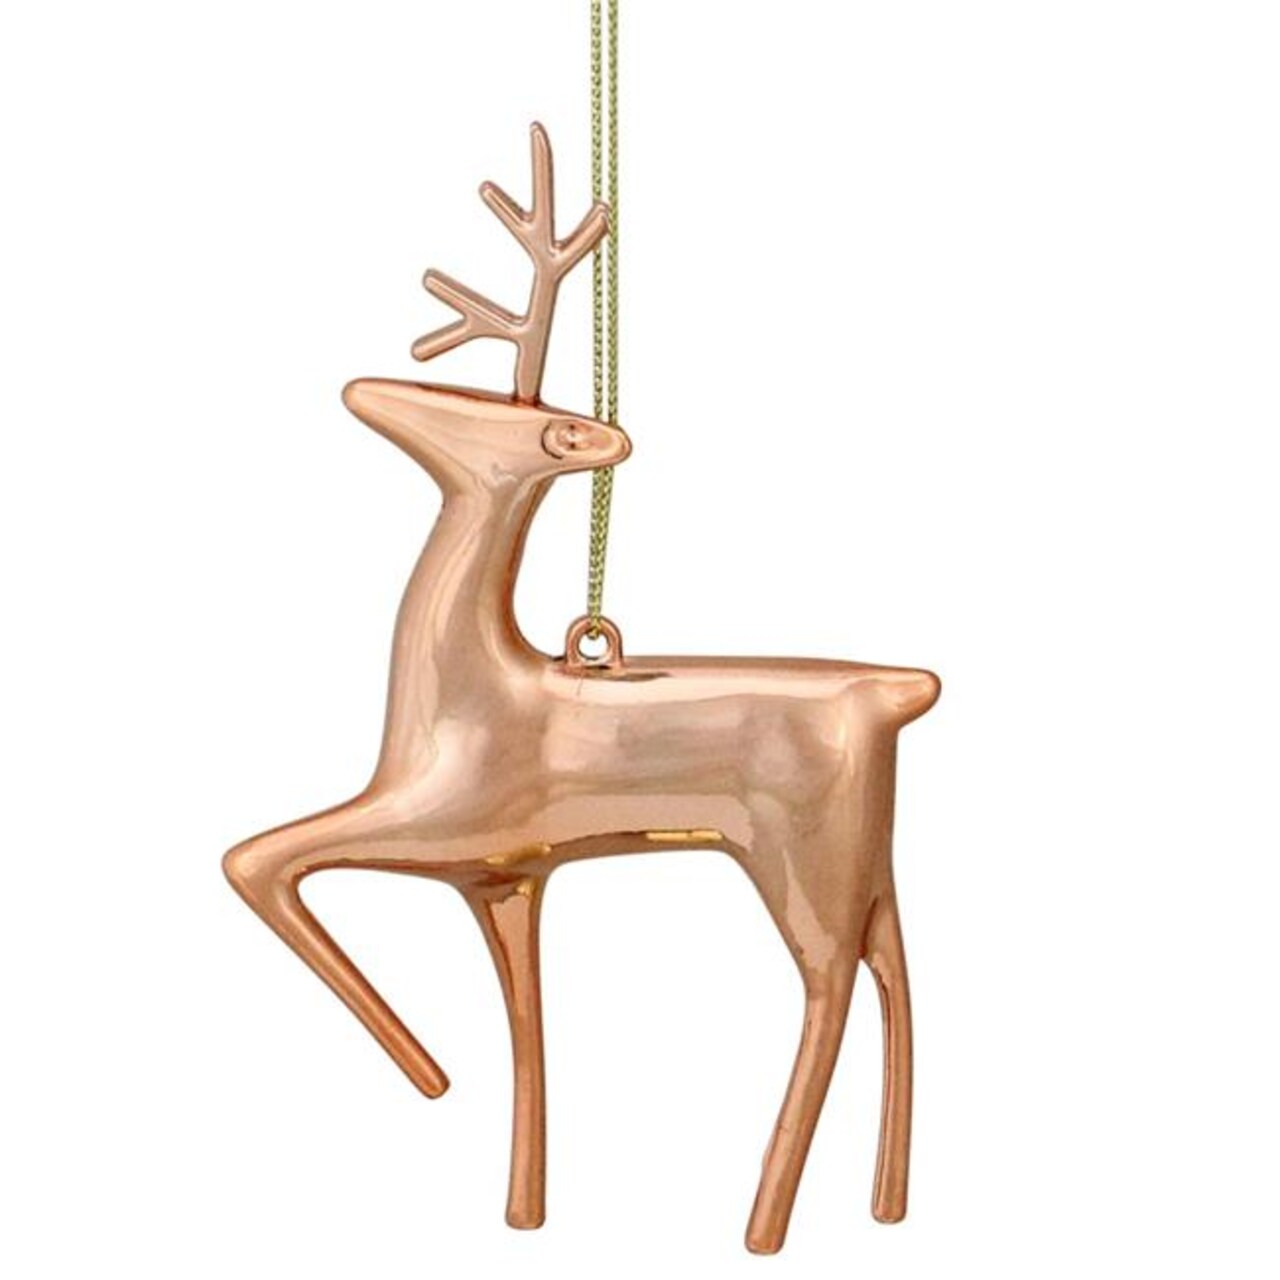 Northlight 32913463 4.75 in. Shiny Rose Gold Metal Reindeer Christmas Tree Ornament